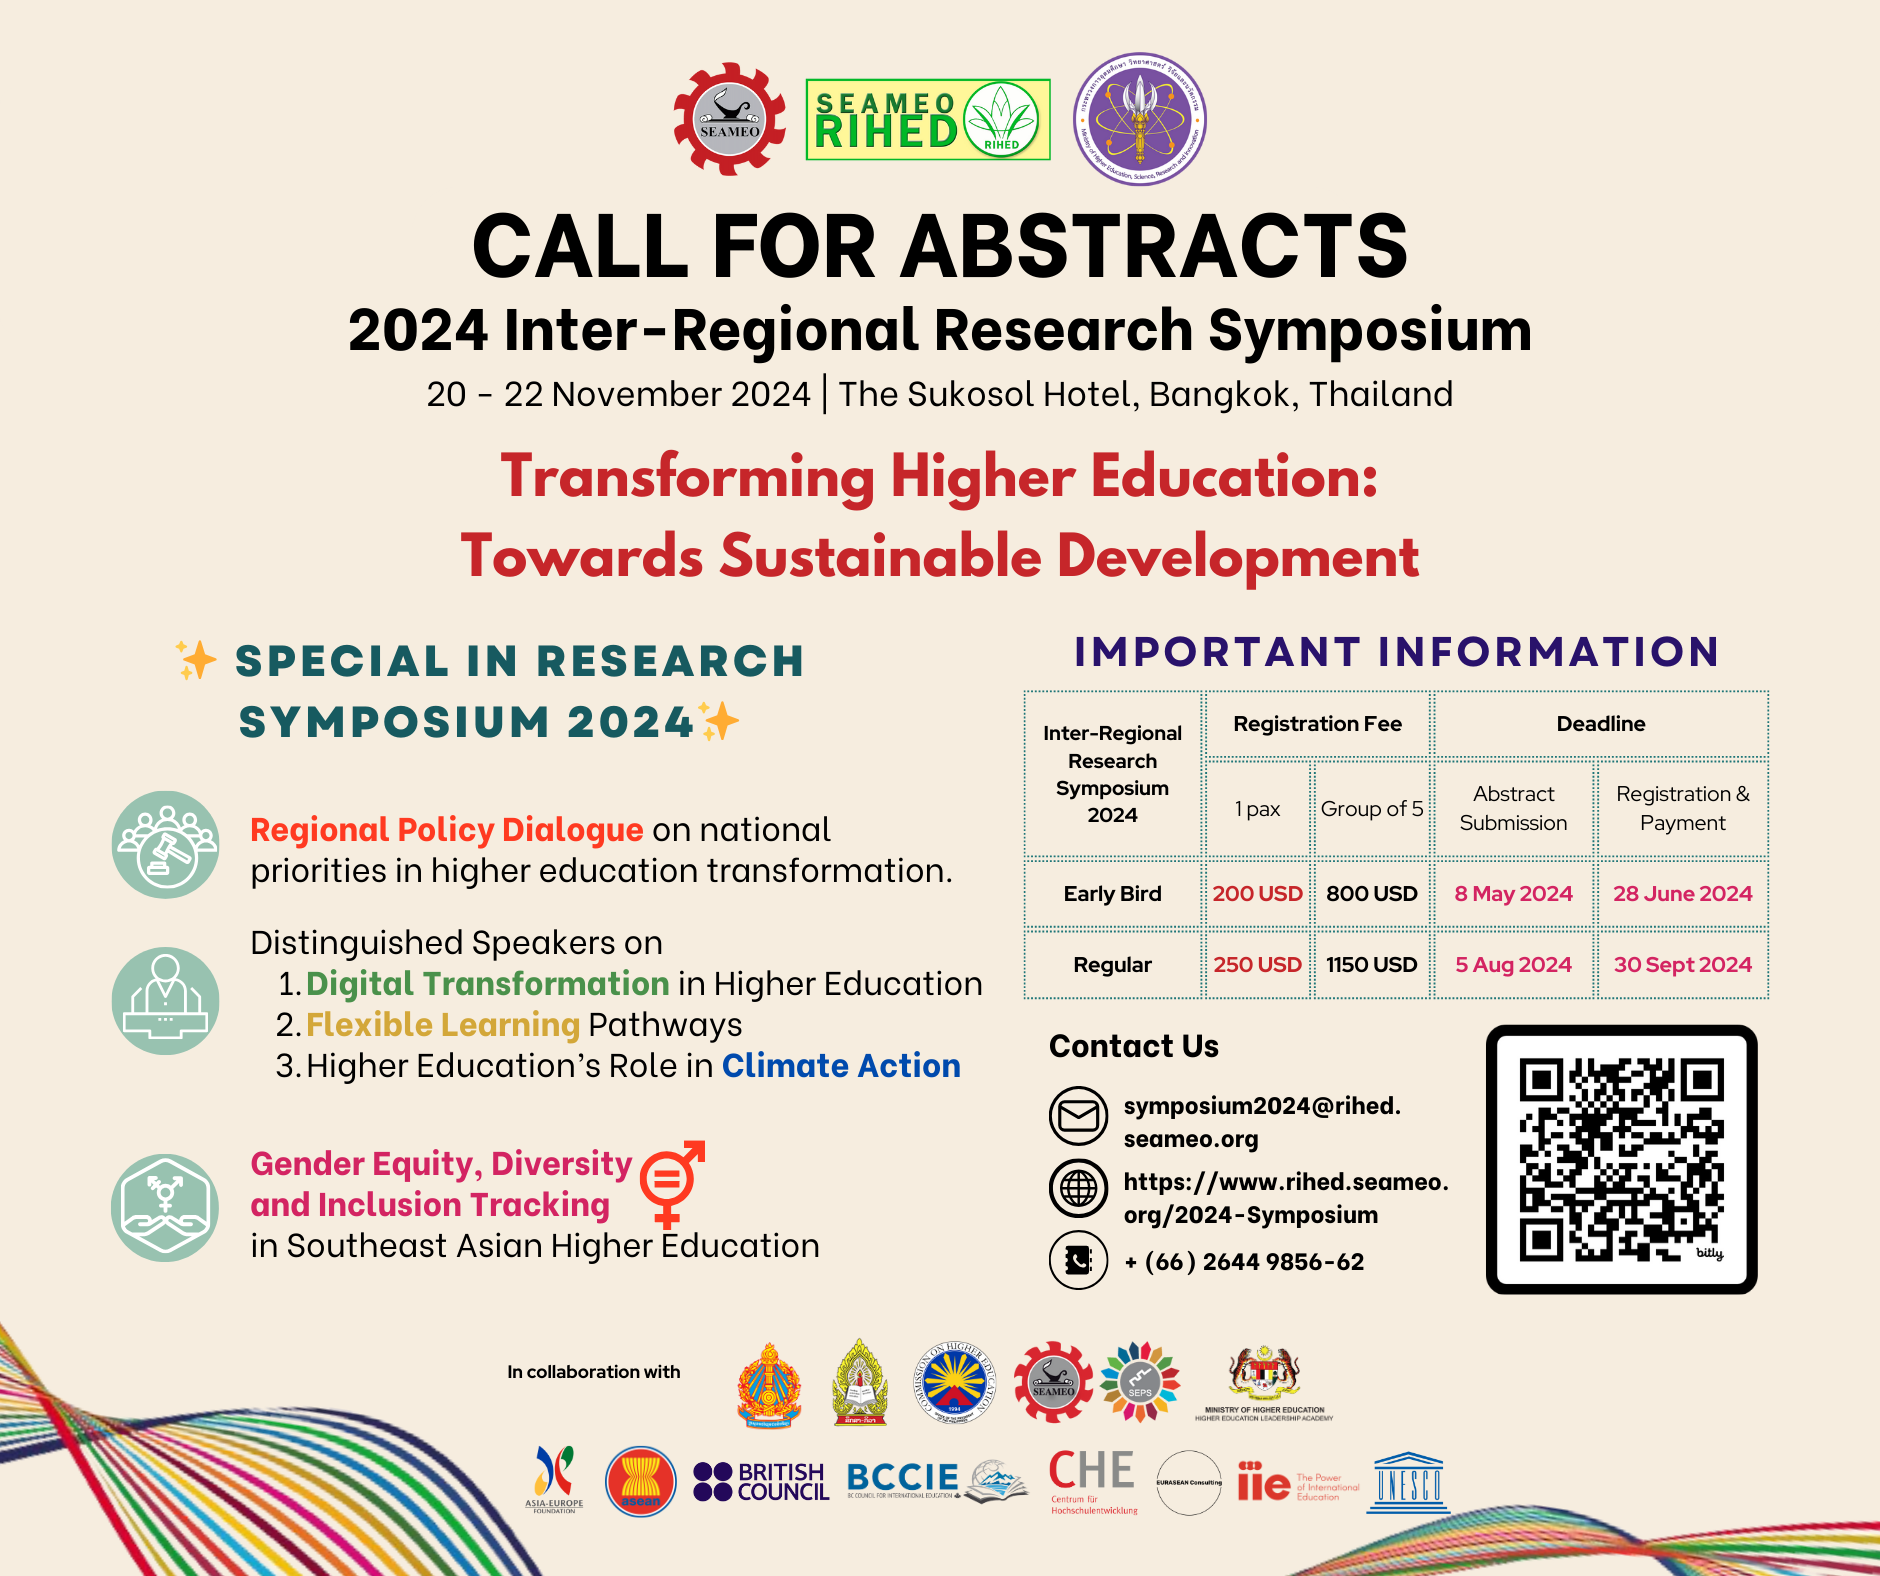 Call for Abstracts: SEAMEO RIHED’s 2024 Inter-Regional Research Symposium